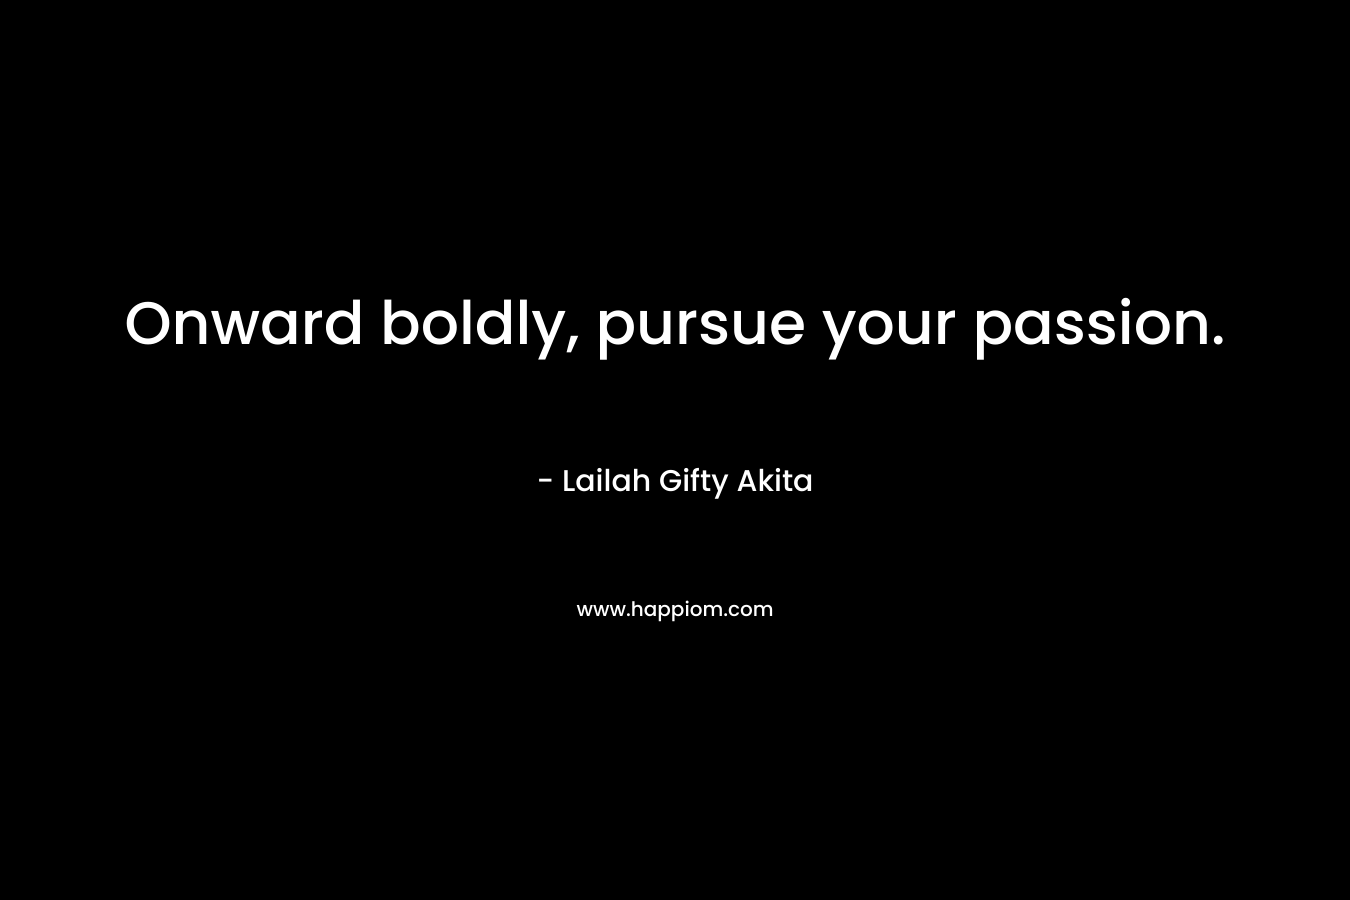 Onward boldly, pursue your passion.